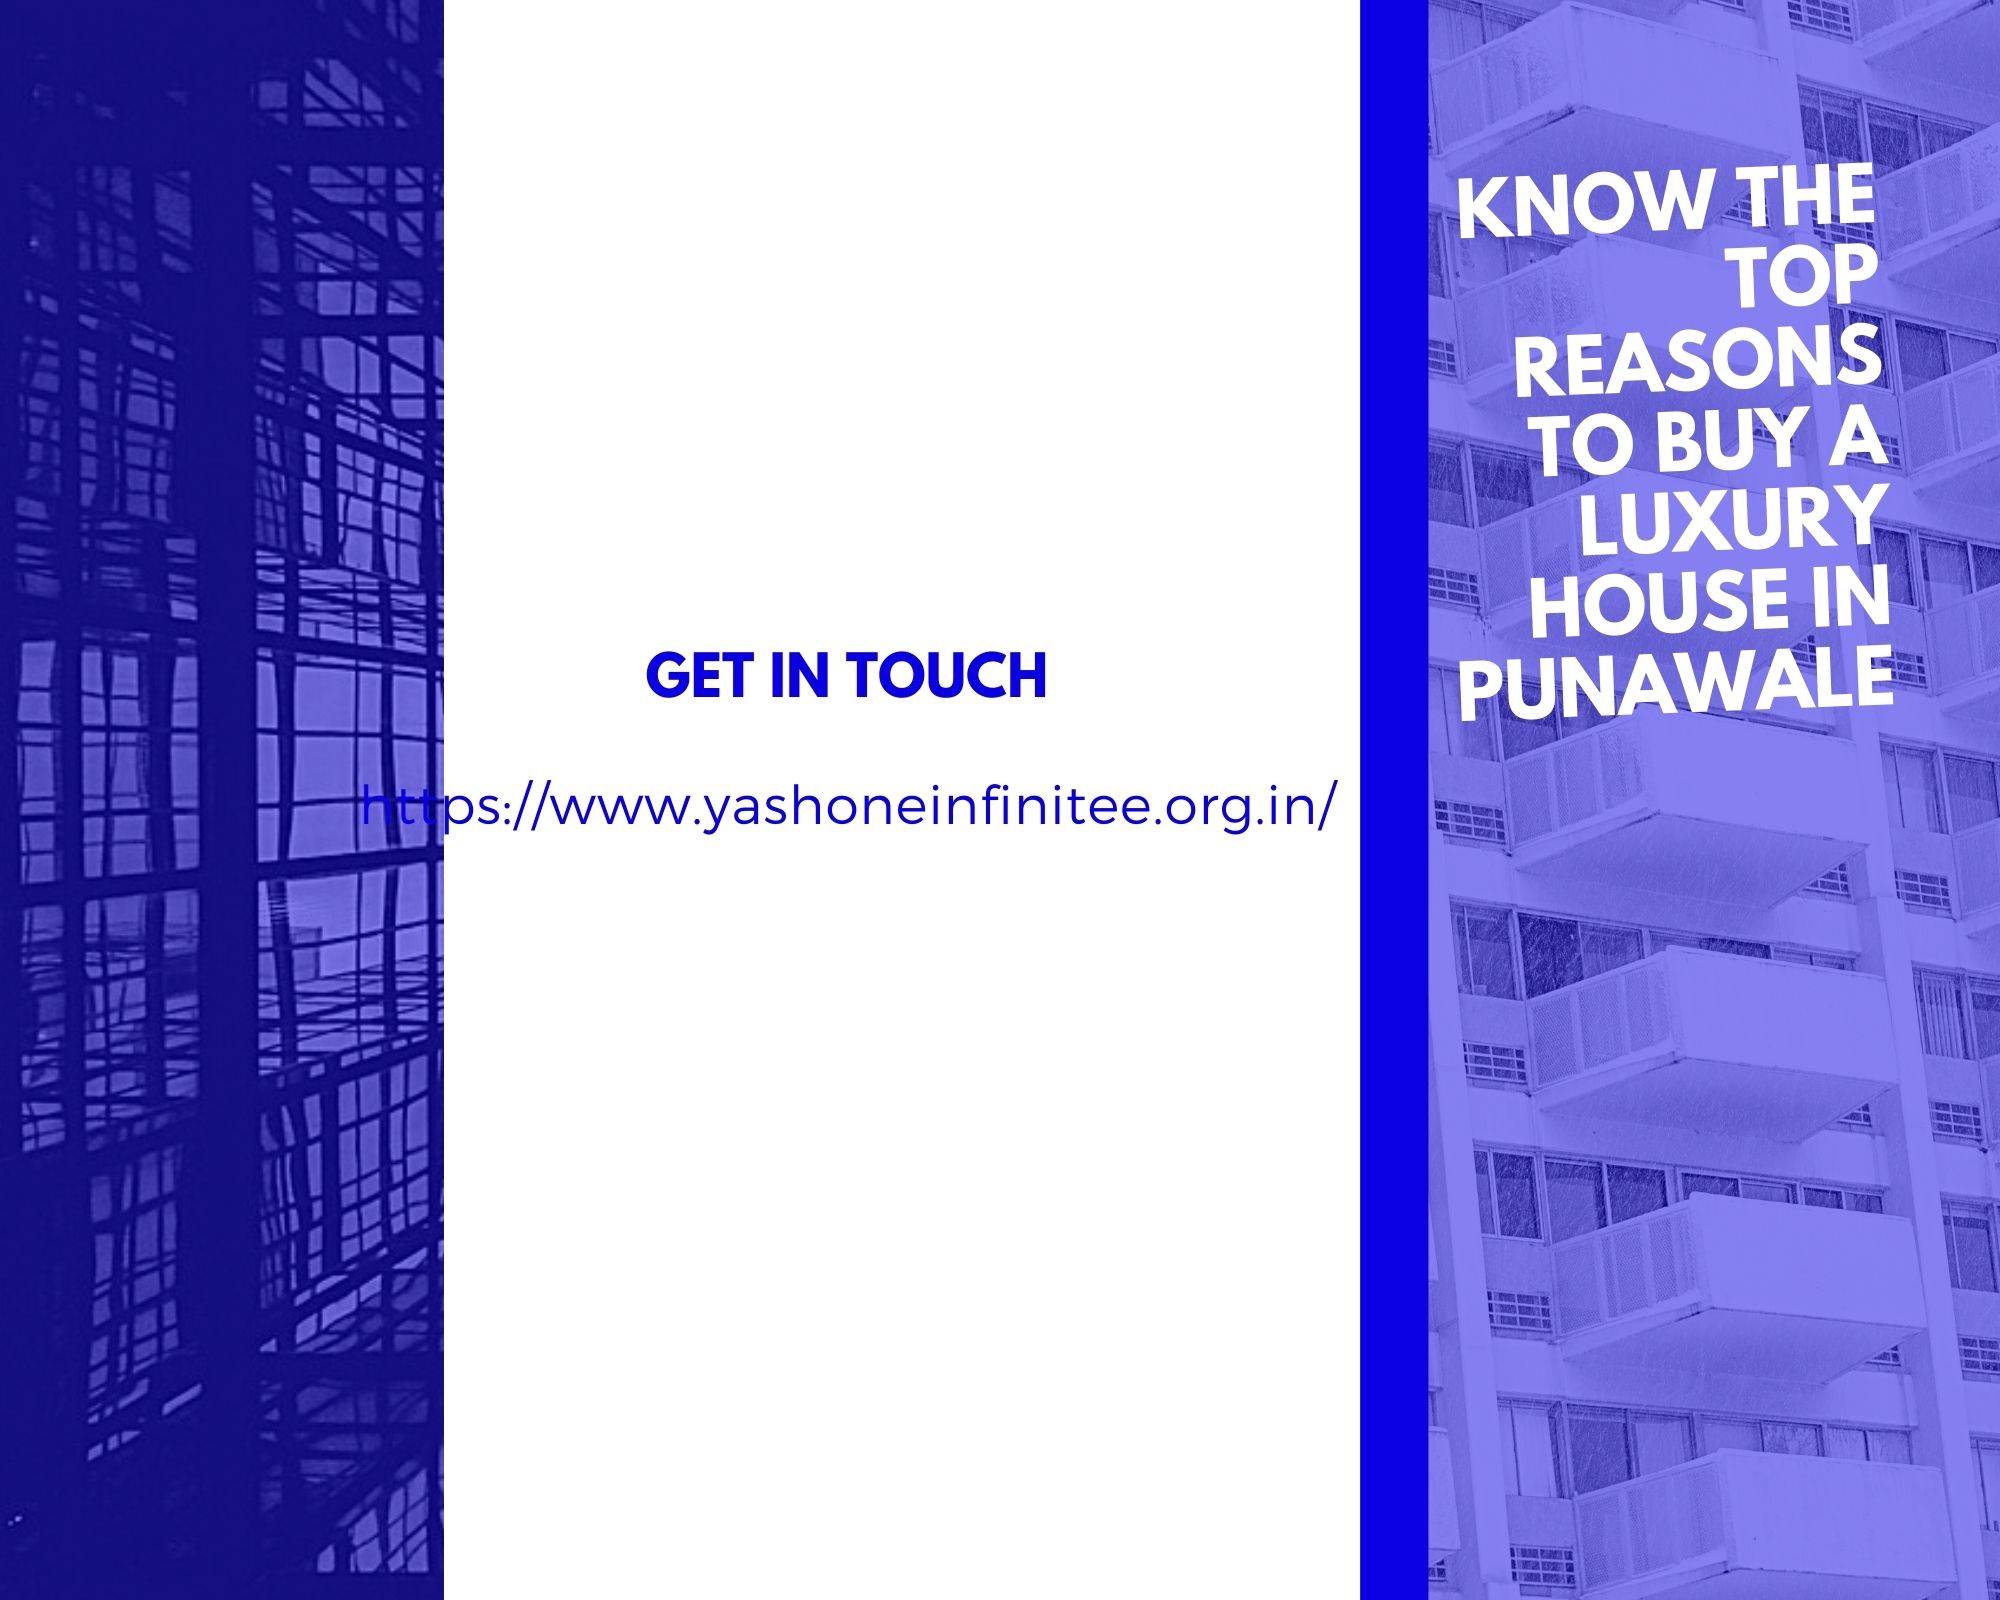 Know the top reasons to buy a luxury house in Punawale